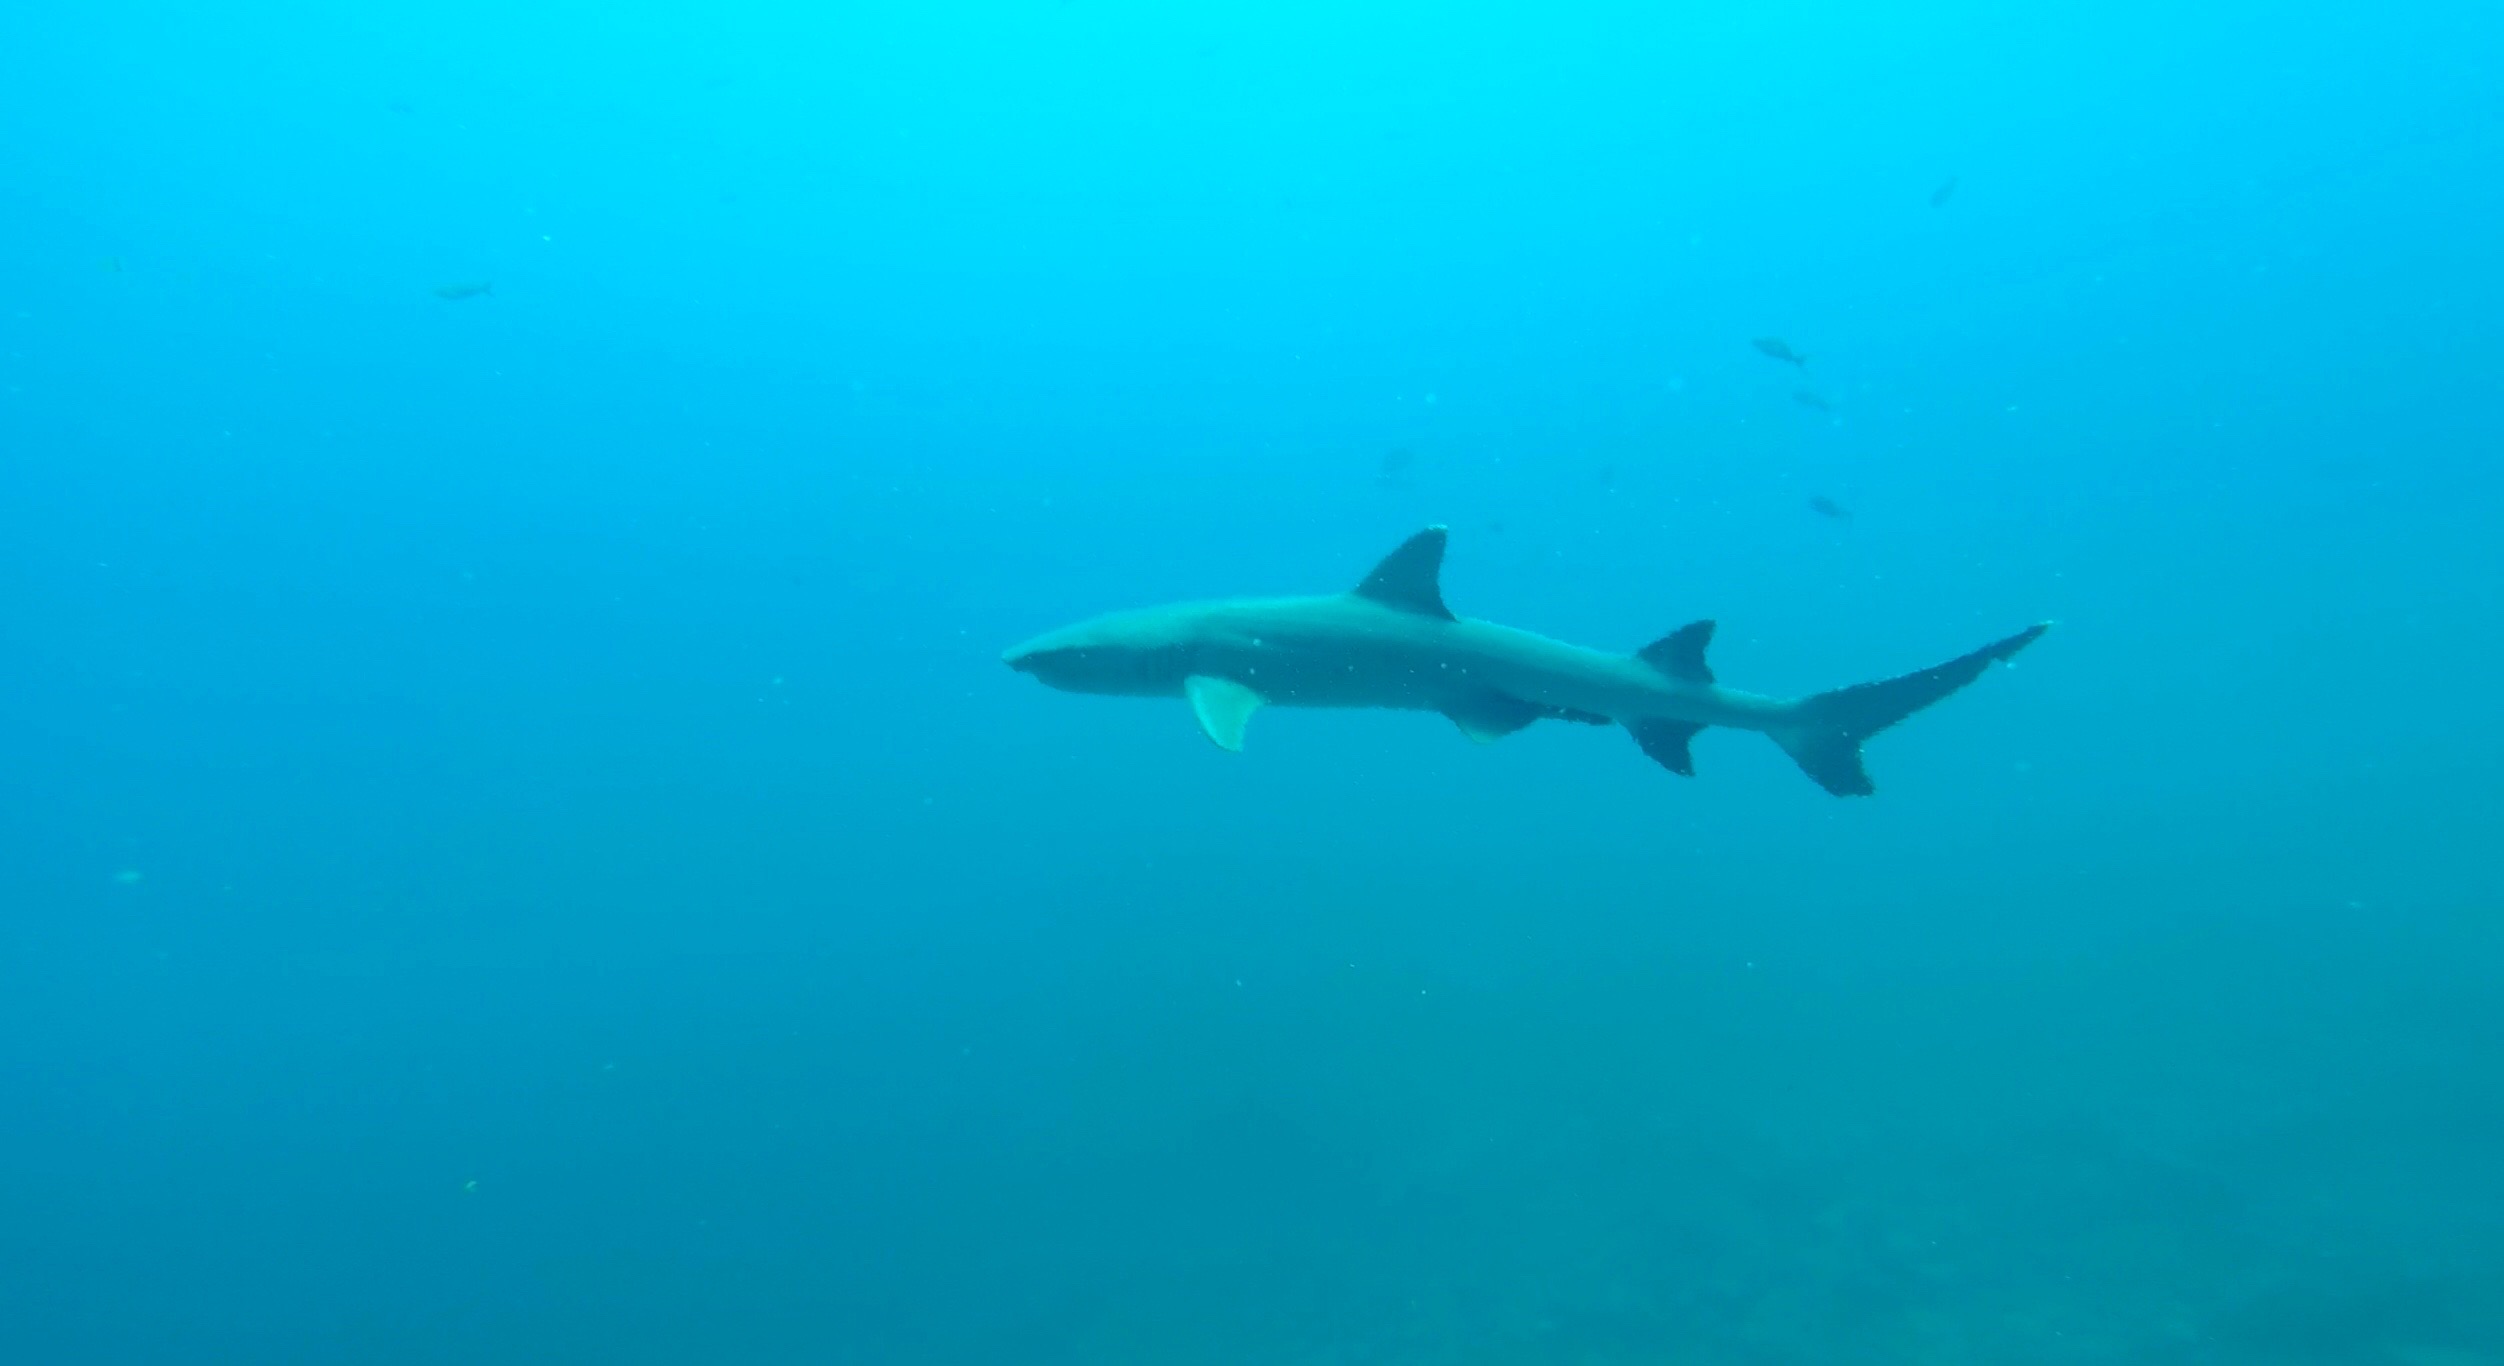 A shark underwater in Galapagos, Ecuador. Swimming with sharks in the Galapagos